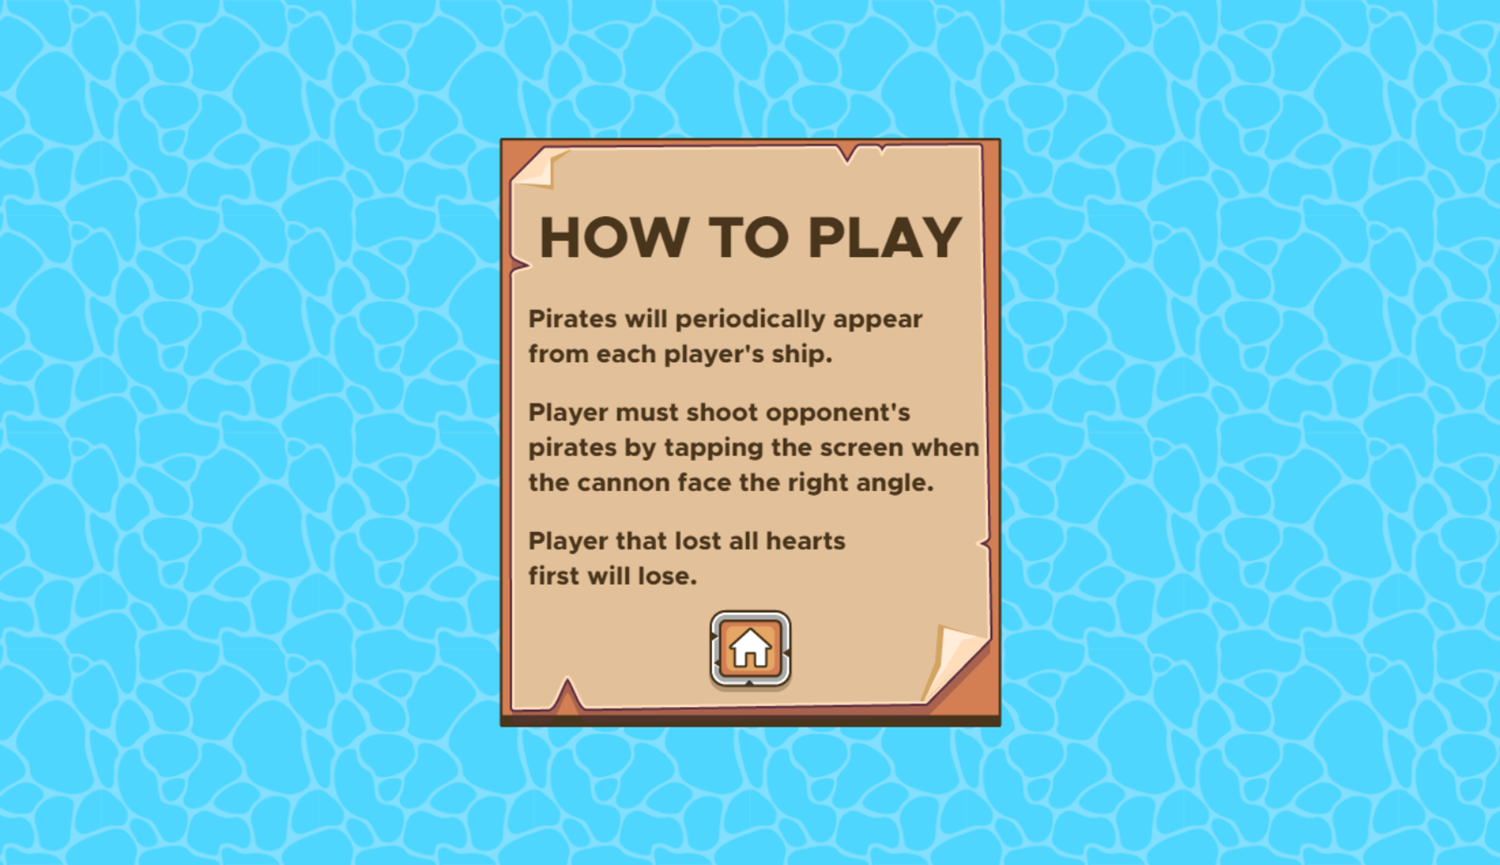 Board The Ship With Buddies Game How To Play Screenshot.